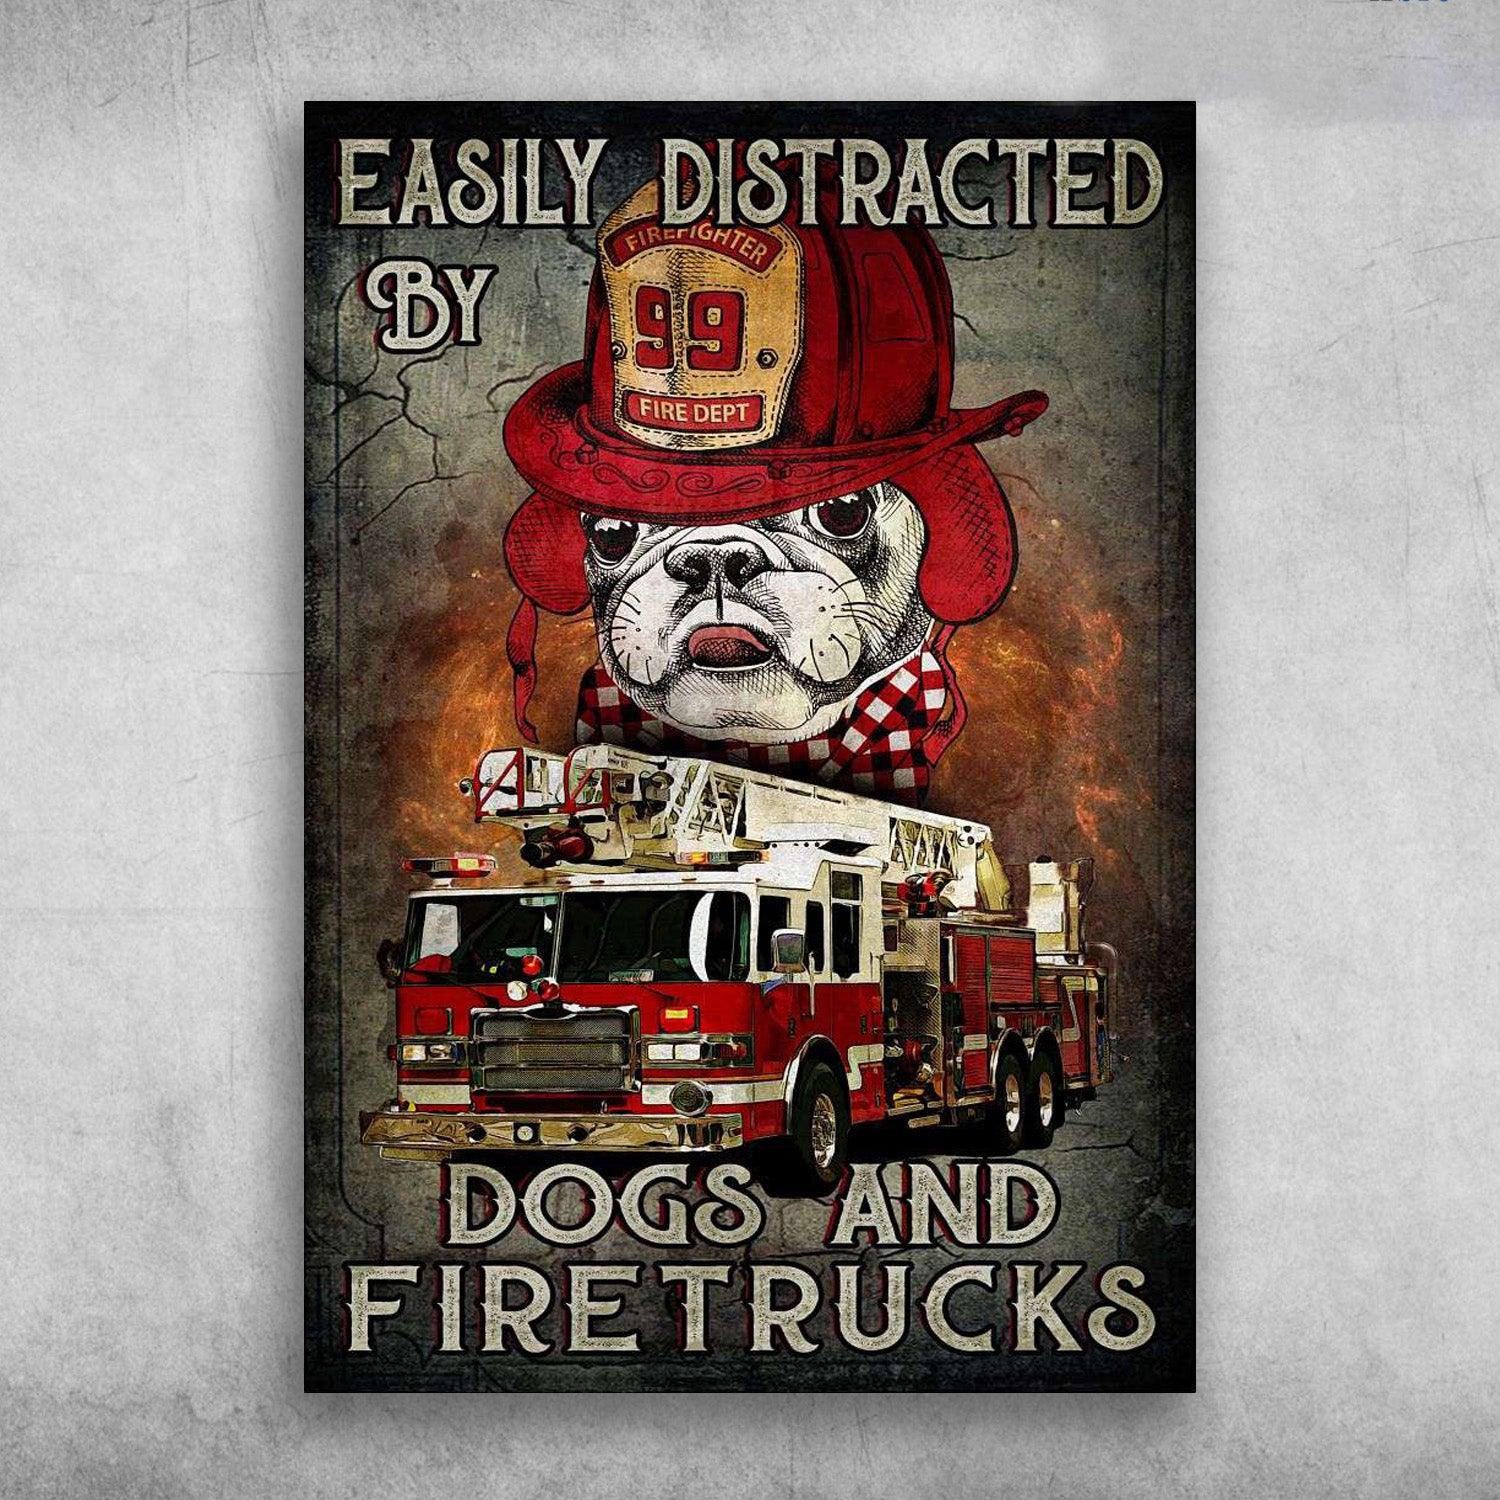 Pug Portrait Canvas - Easily Distracted By Dogs And Firetrucks - Perfect Gift For A Pug Owner Who Is A Firefighter And Loves Pug Portrait Canvas, Wall Decor Visual Art - Amzanimalsgift